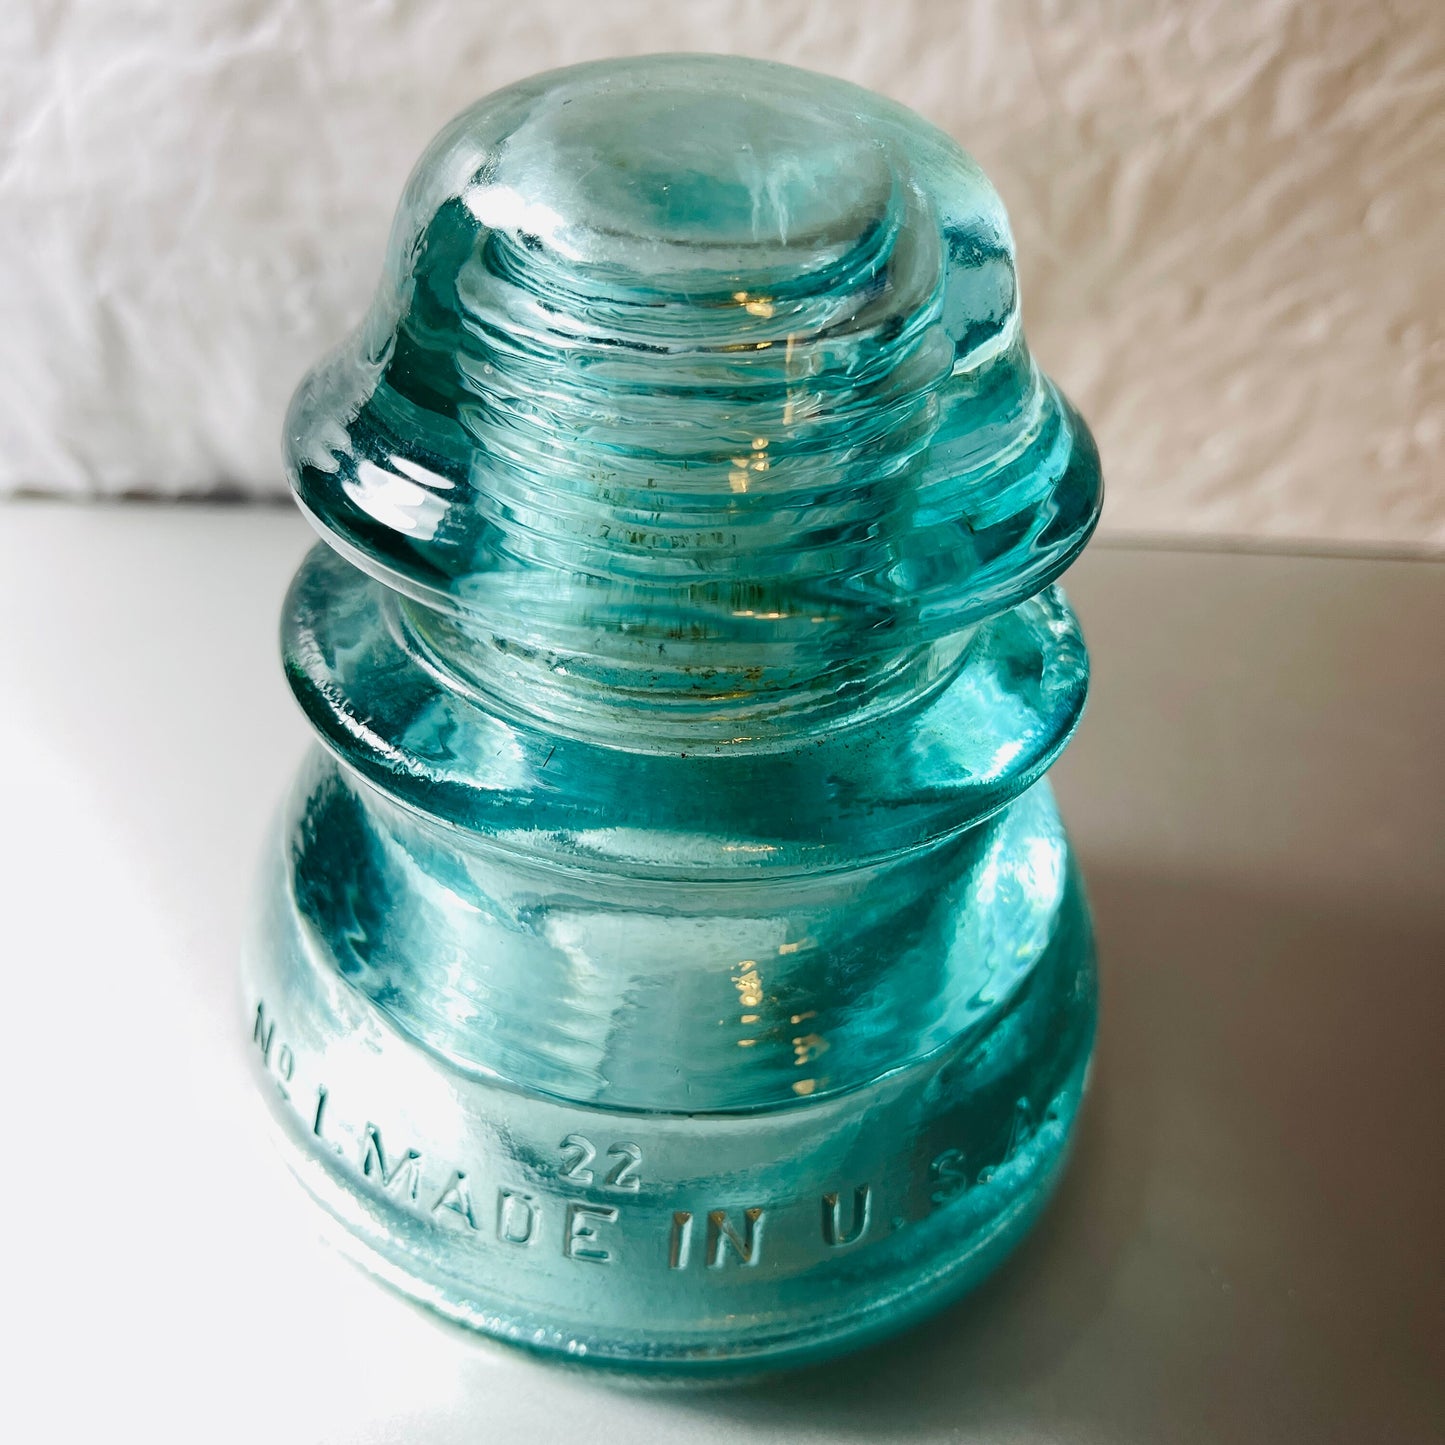 Whitall Tatum Co., USA Electric Blue Glass, Insulator, Vintage Power Line Insulator in mint condition